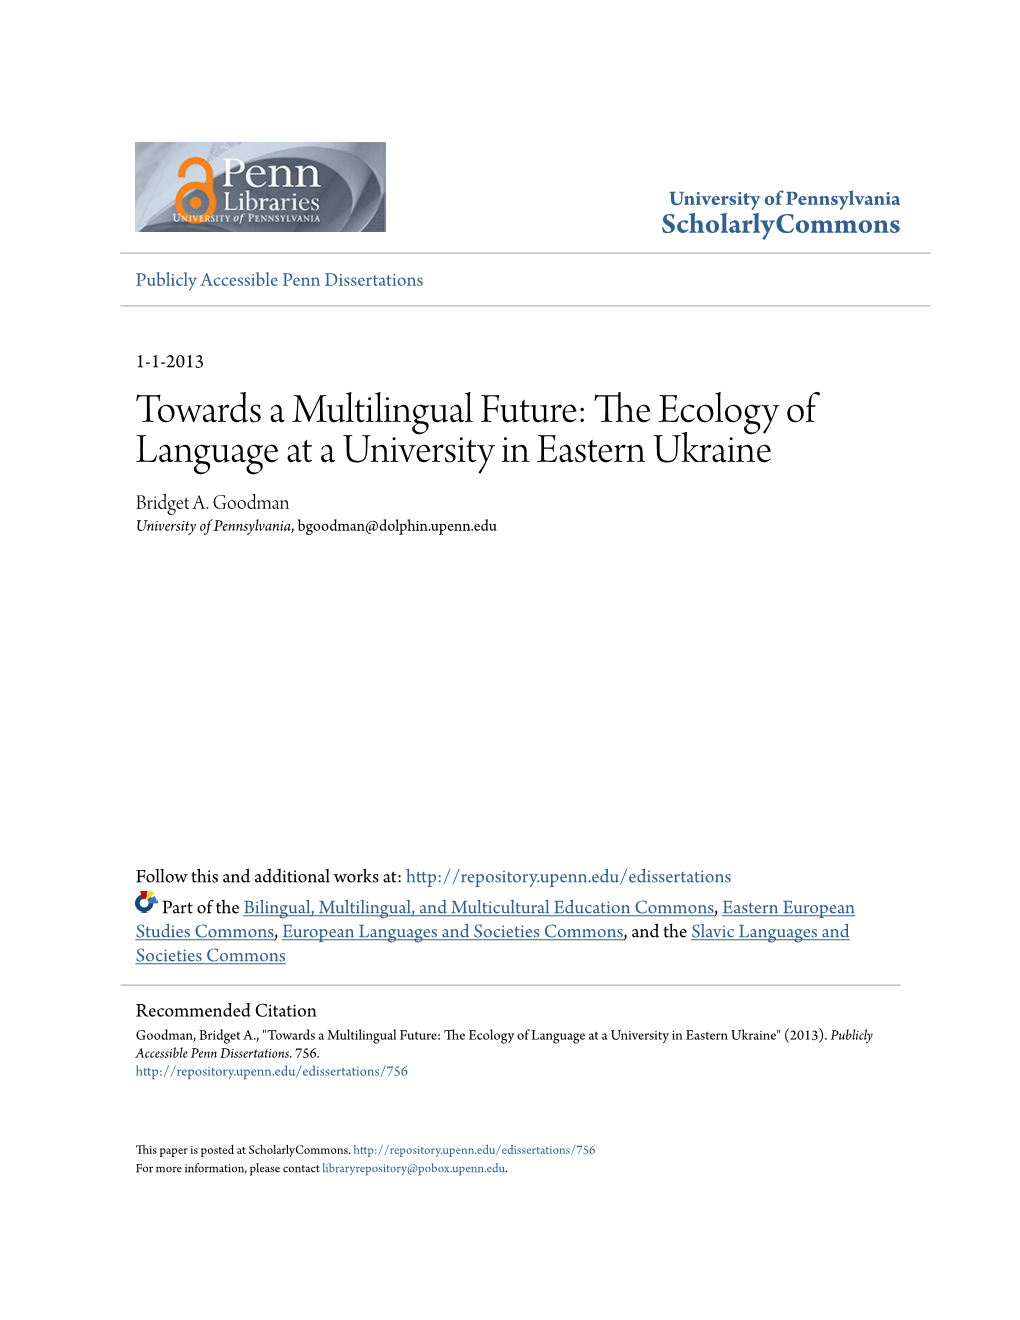 The Ecology of Language at a University in Eastern Ukraine